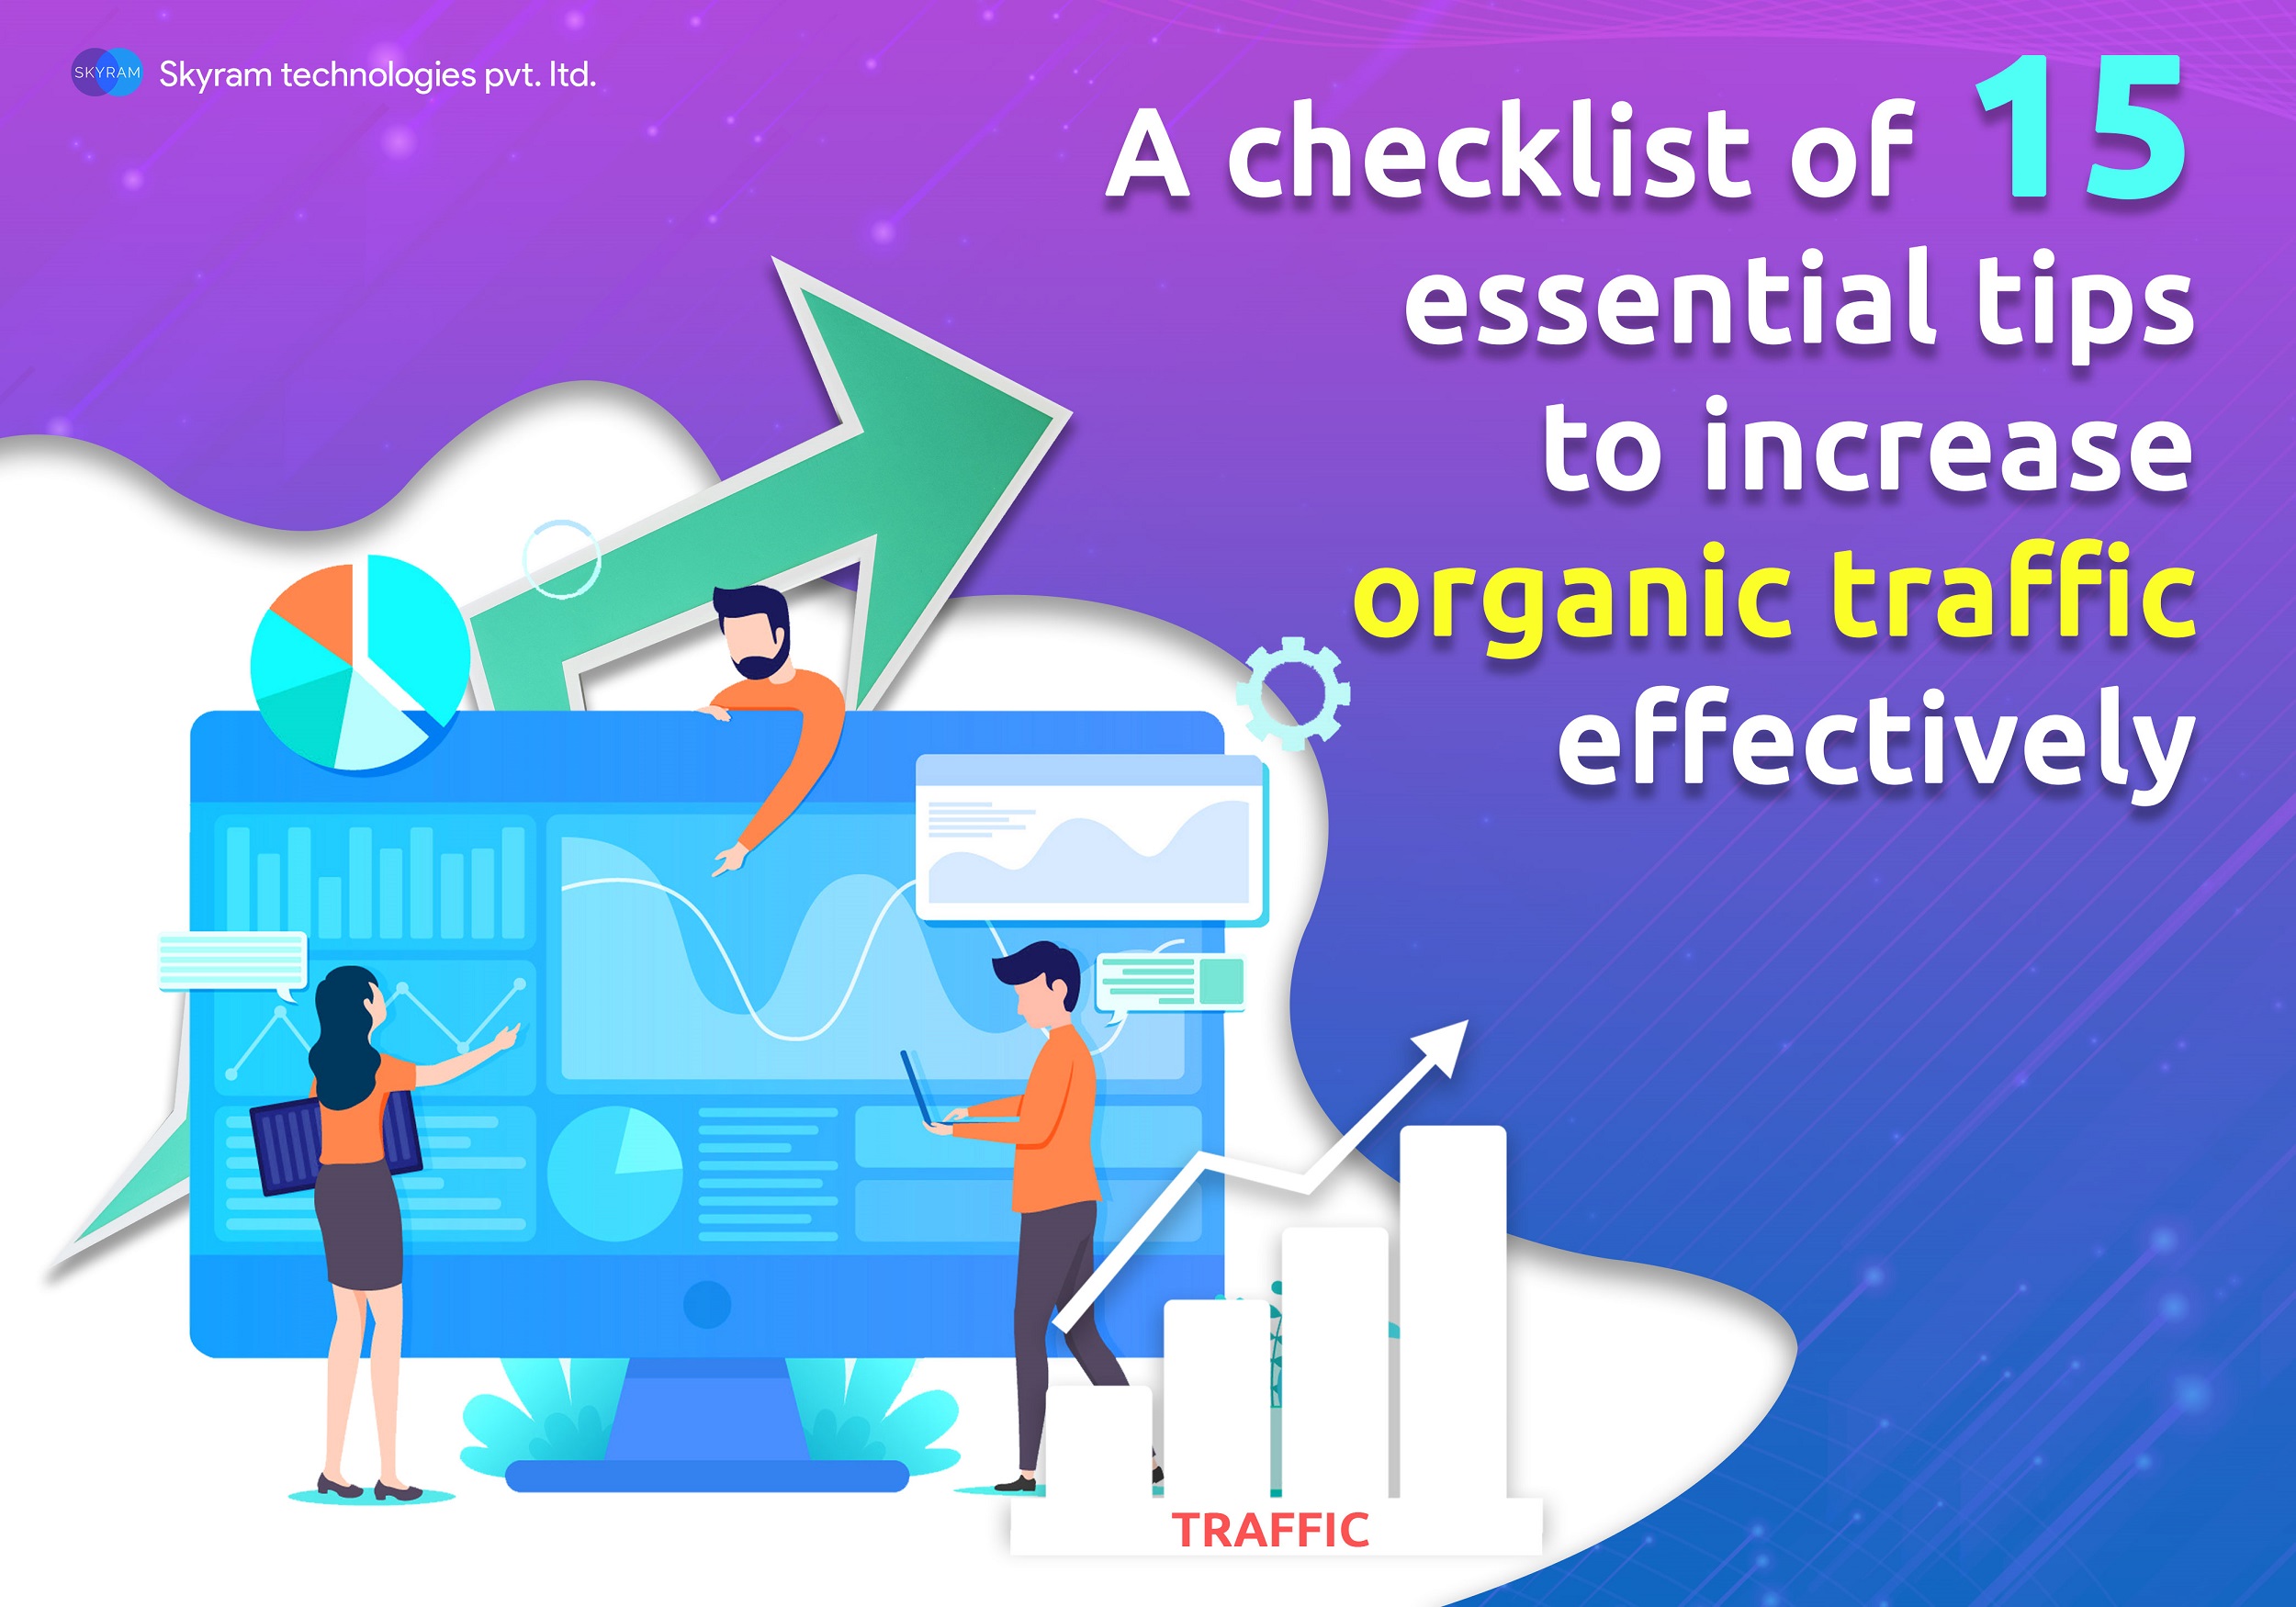 A Checklist Of 15 Essential Tips To Increase Organic Traffic Effectively